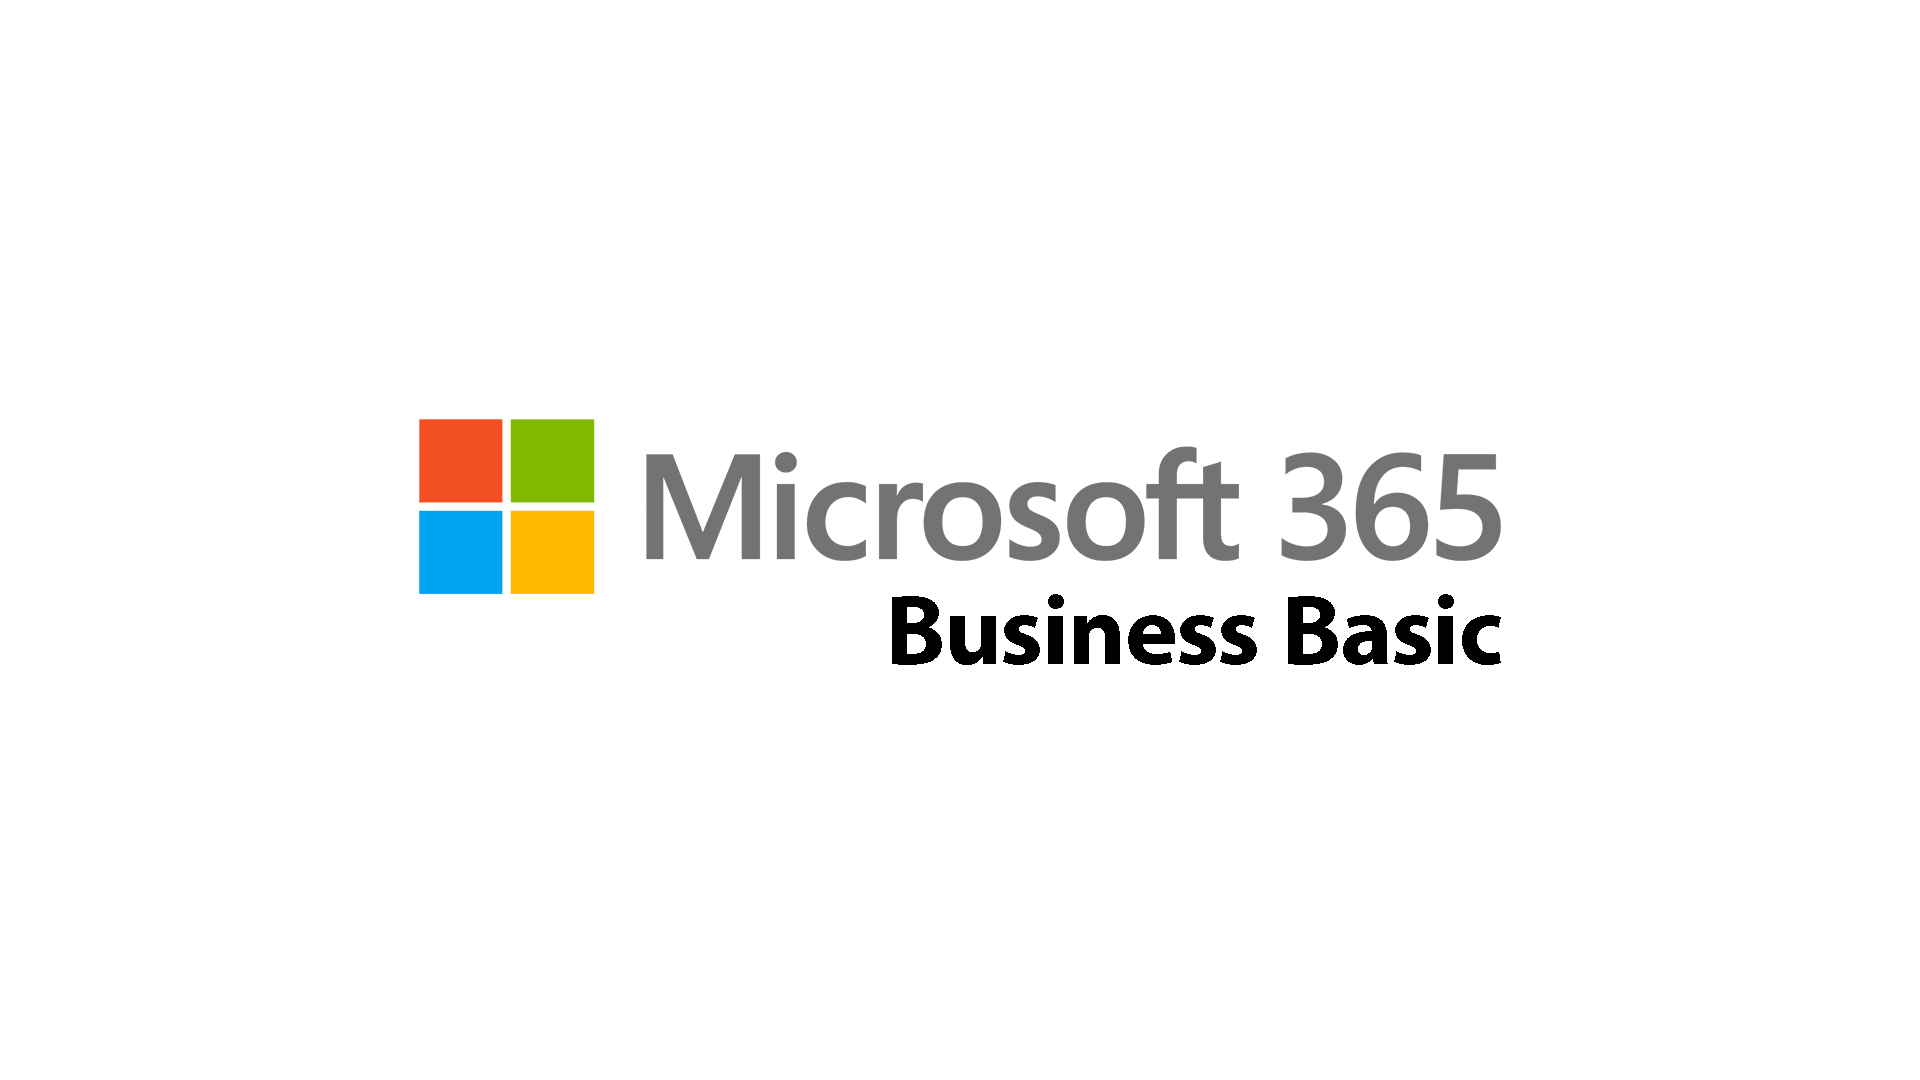 Maximise use of Microsoft 365 Business Basic license (formerly Office 365 Business Essentials)